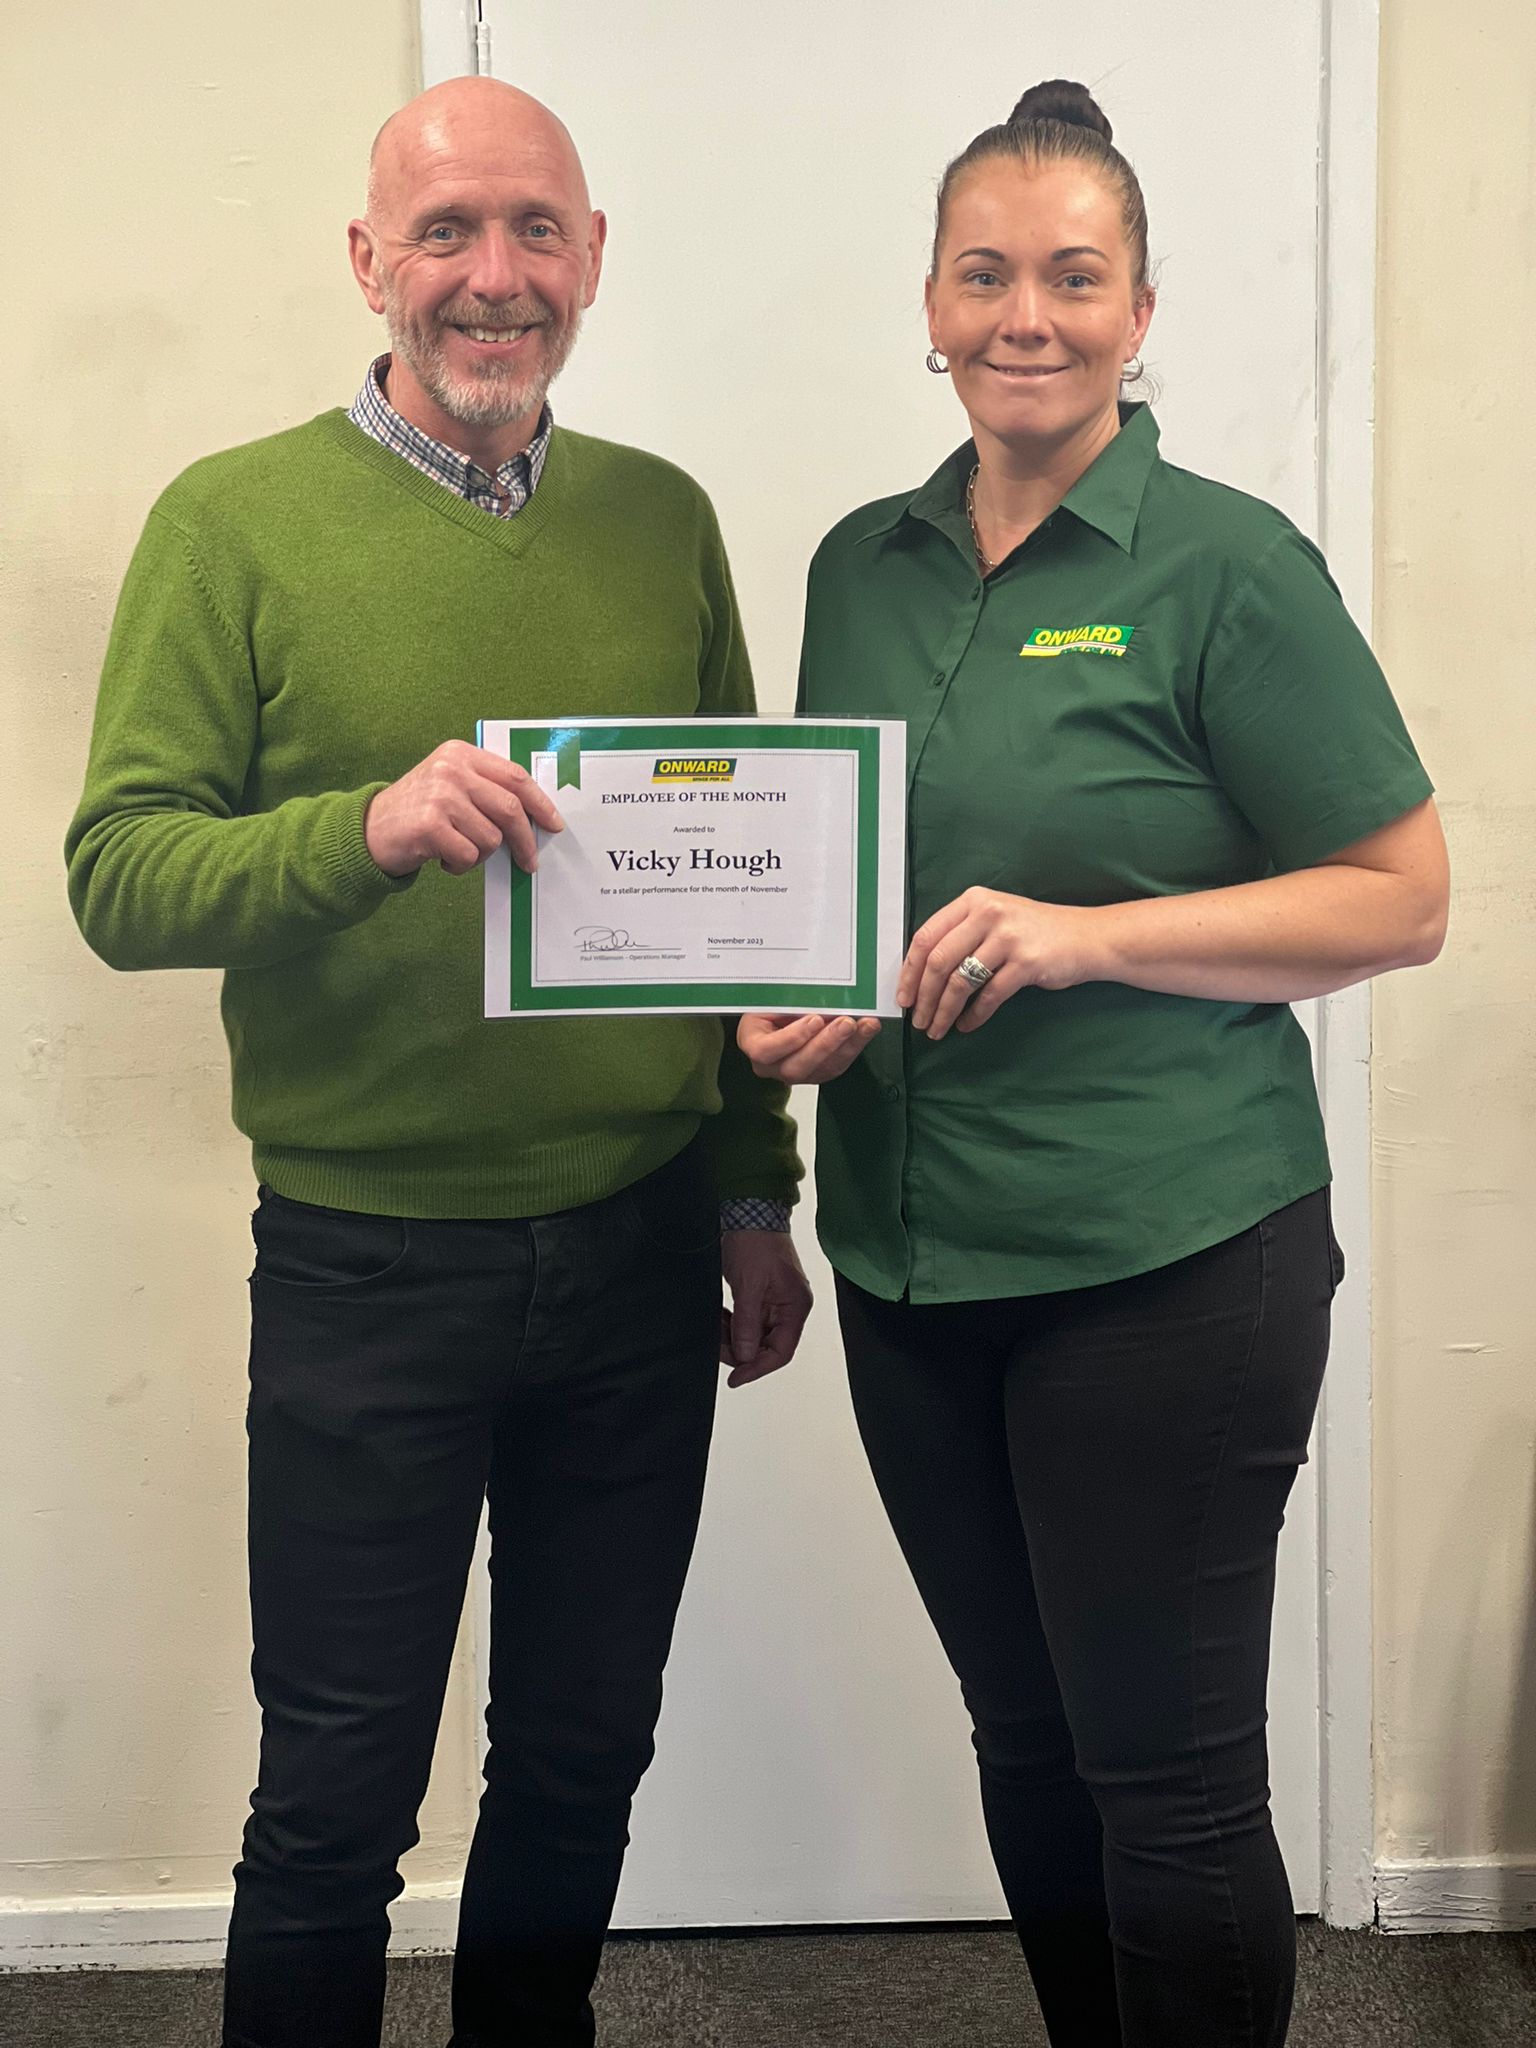 Vicky Hough, Employee of the Month for December